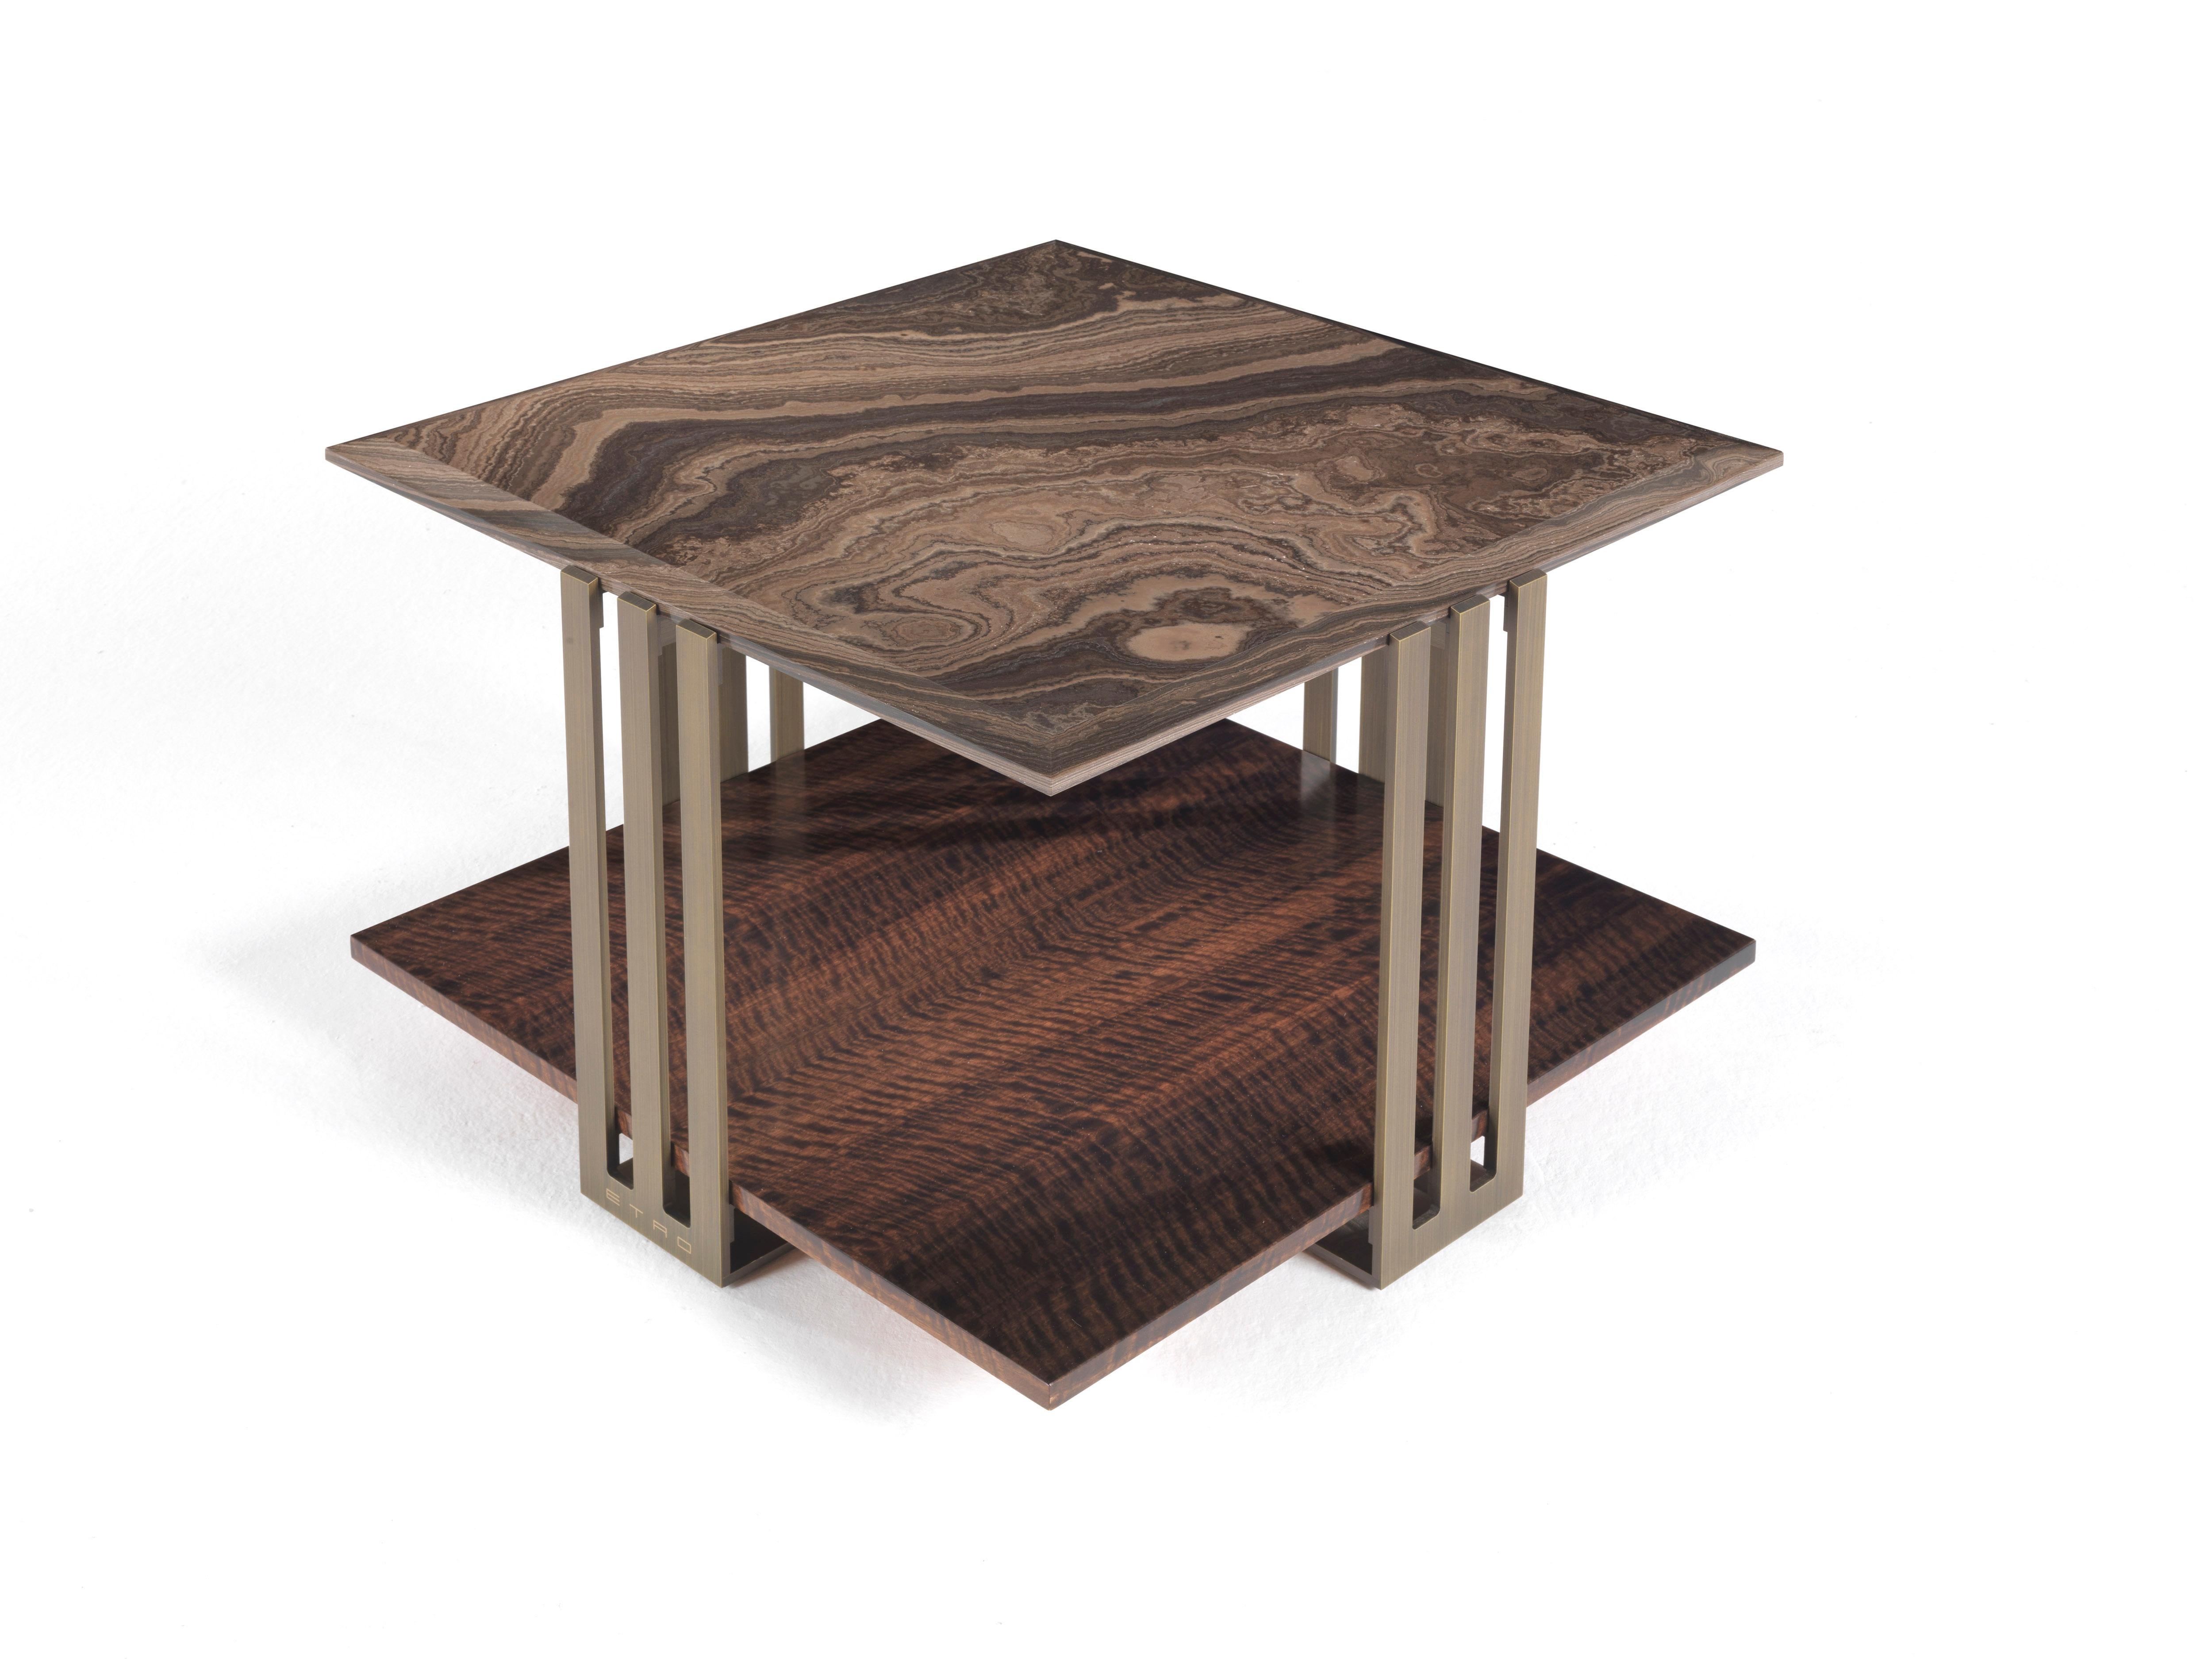 A compact two-tops small table featuring an original combination of materials. The structure in patinated bronze metal meets the precious elegance of the tops in marble or wood from the Etro Home Interiors collection, creating a precious and